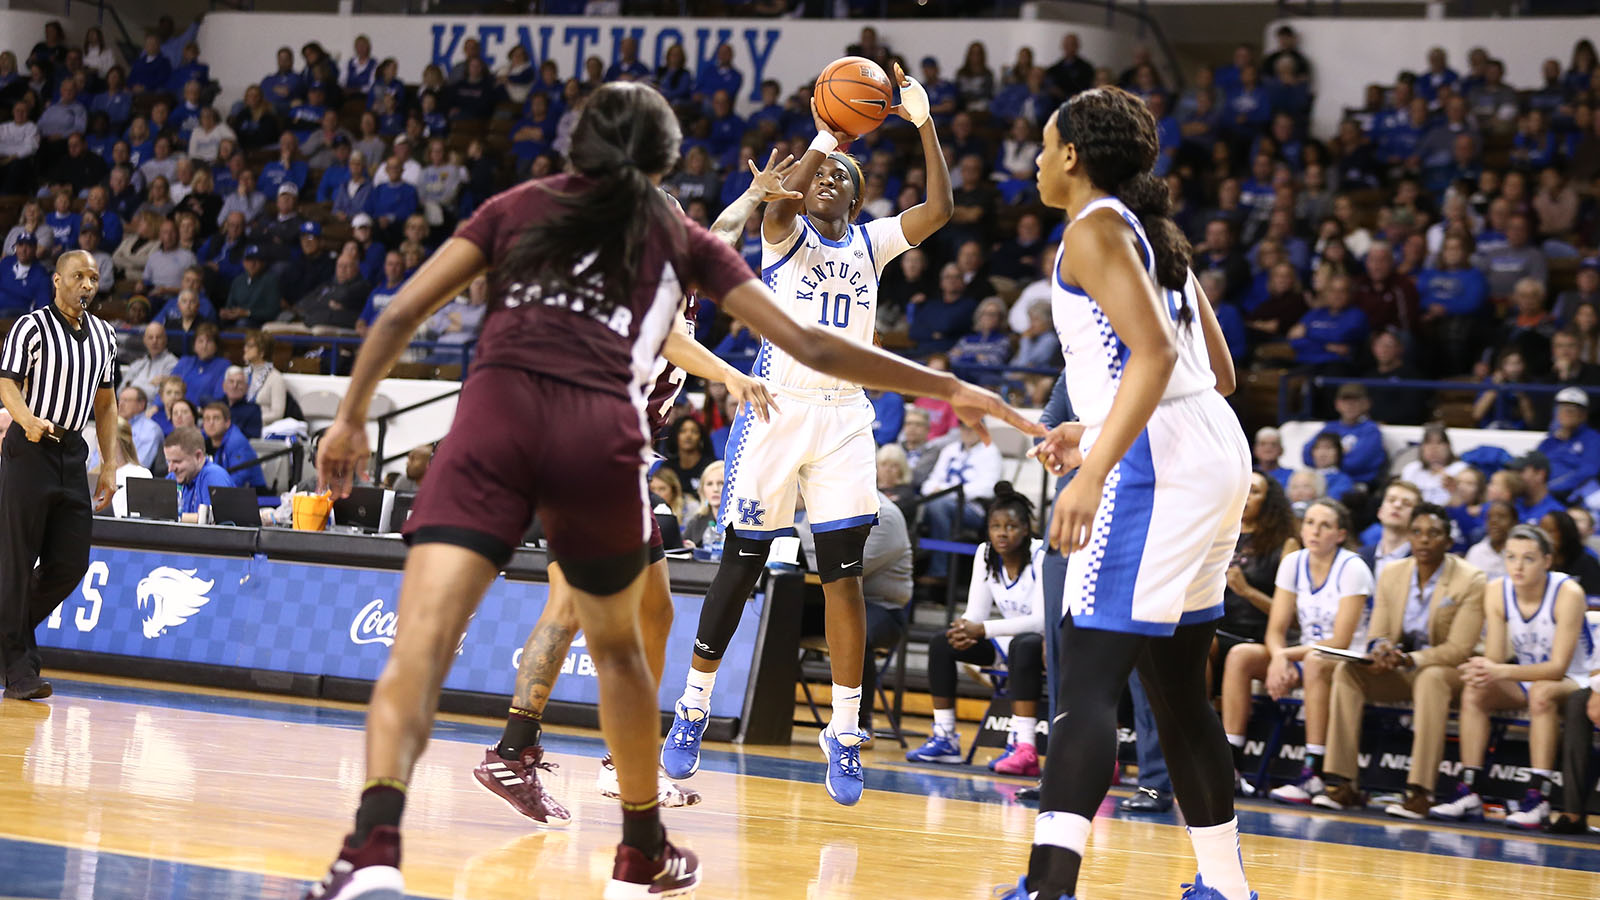 Confident, Improved Cats Hope for Better Result Against South Carolina